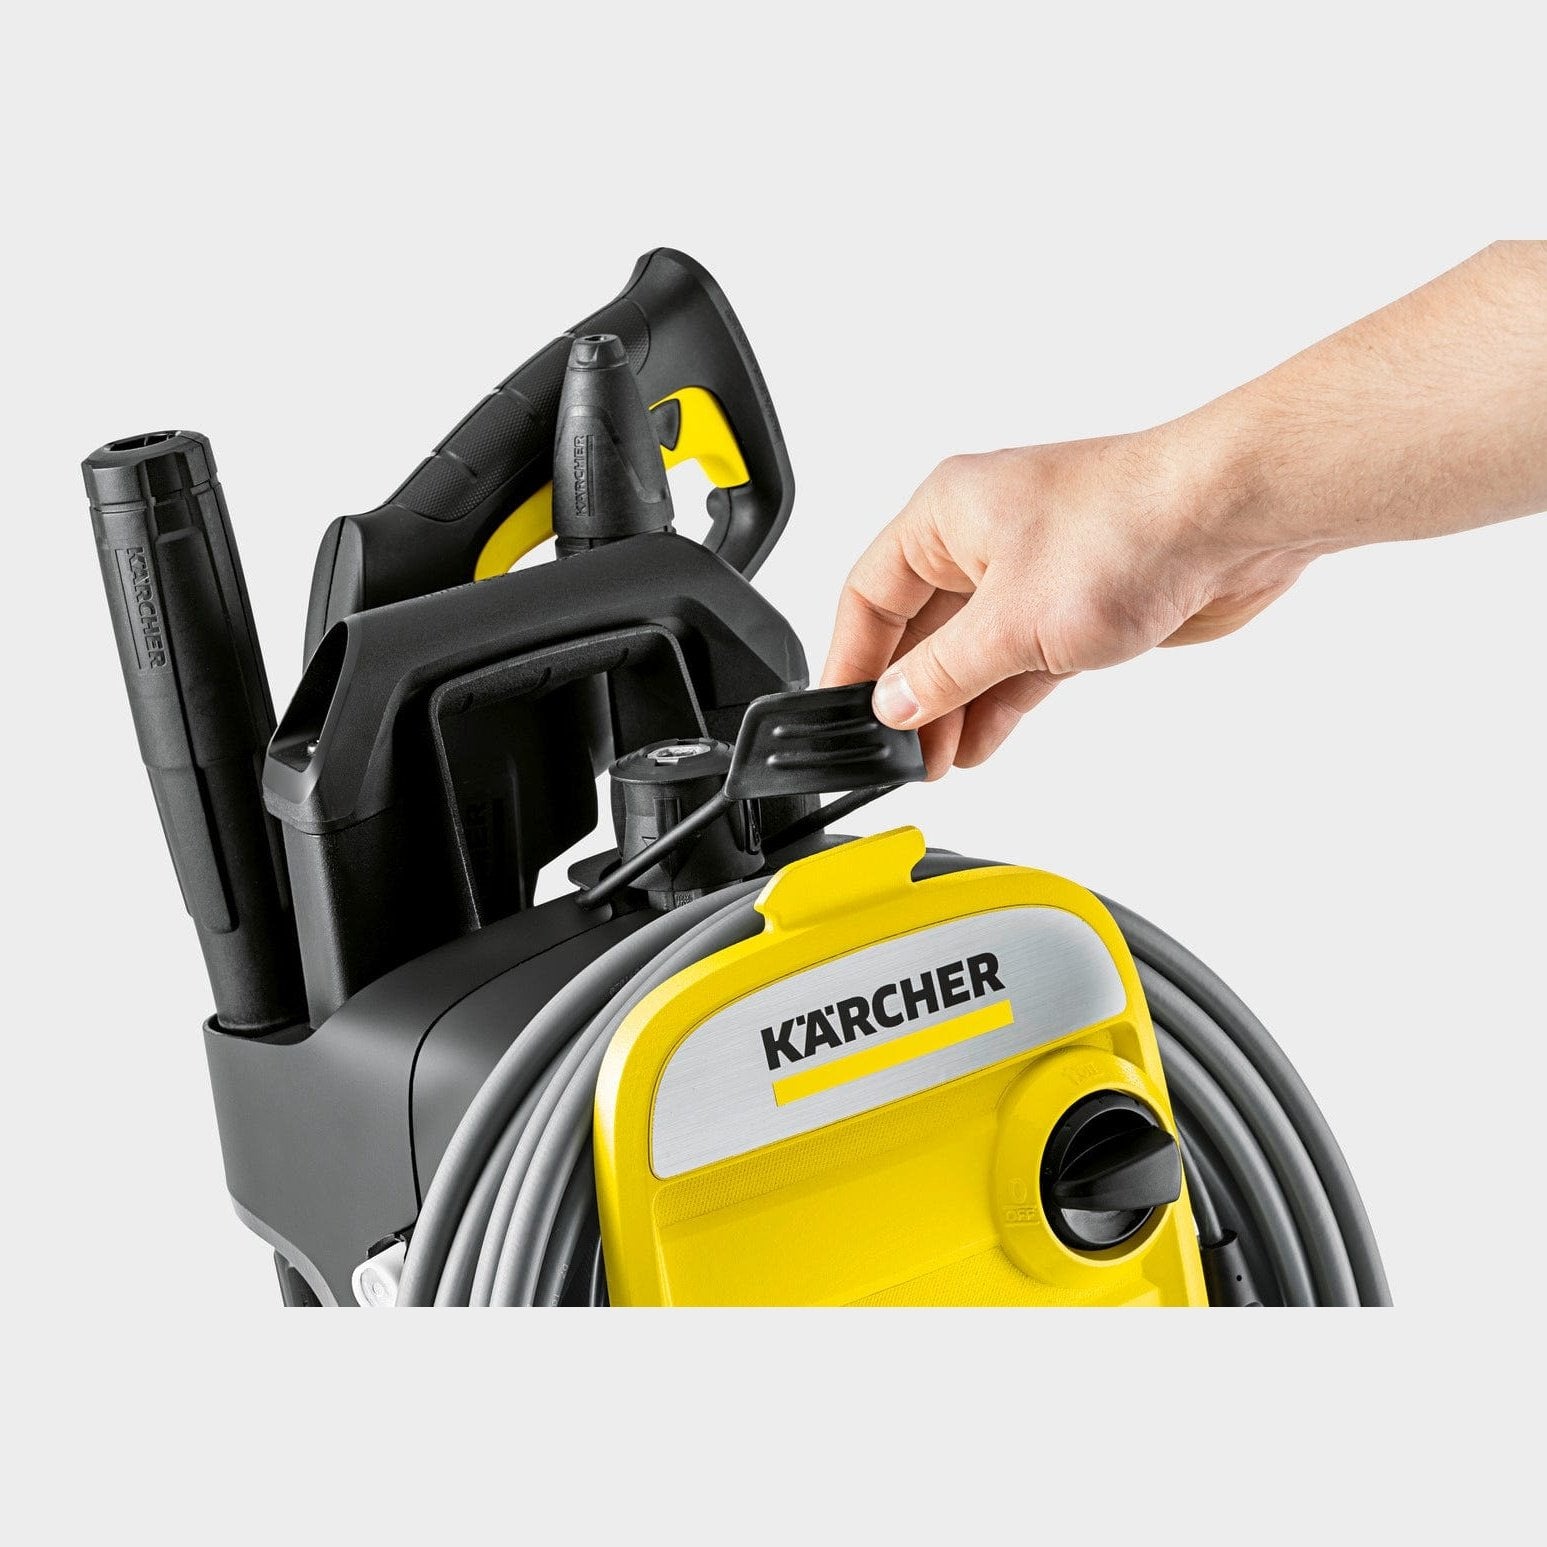 Karcher K7 Premium Full Control Plus Home Pressure Washer 180 Bar | Supply Master | Accra, Ghana Pressure Washer Buy Tools hardware Building materials